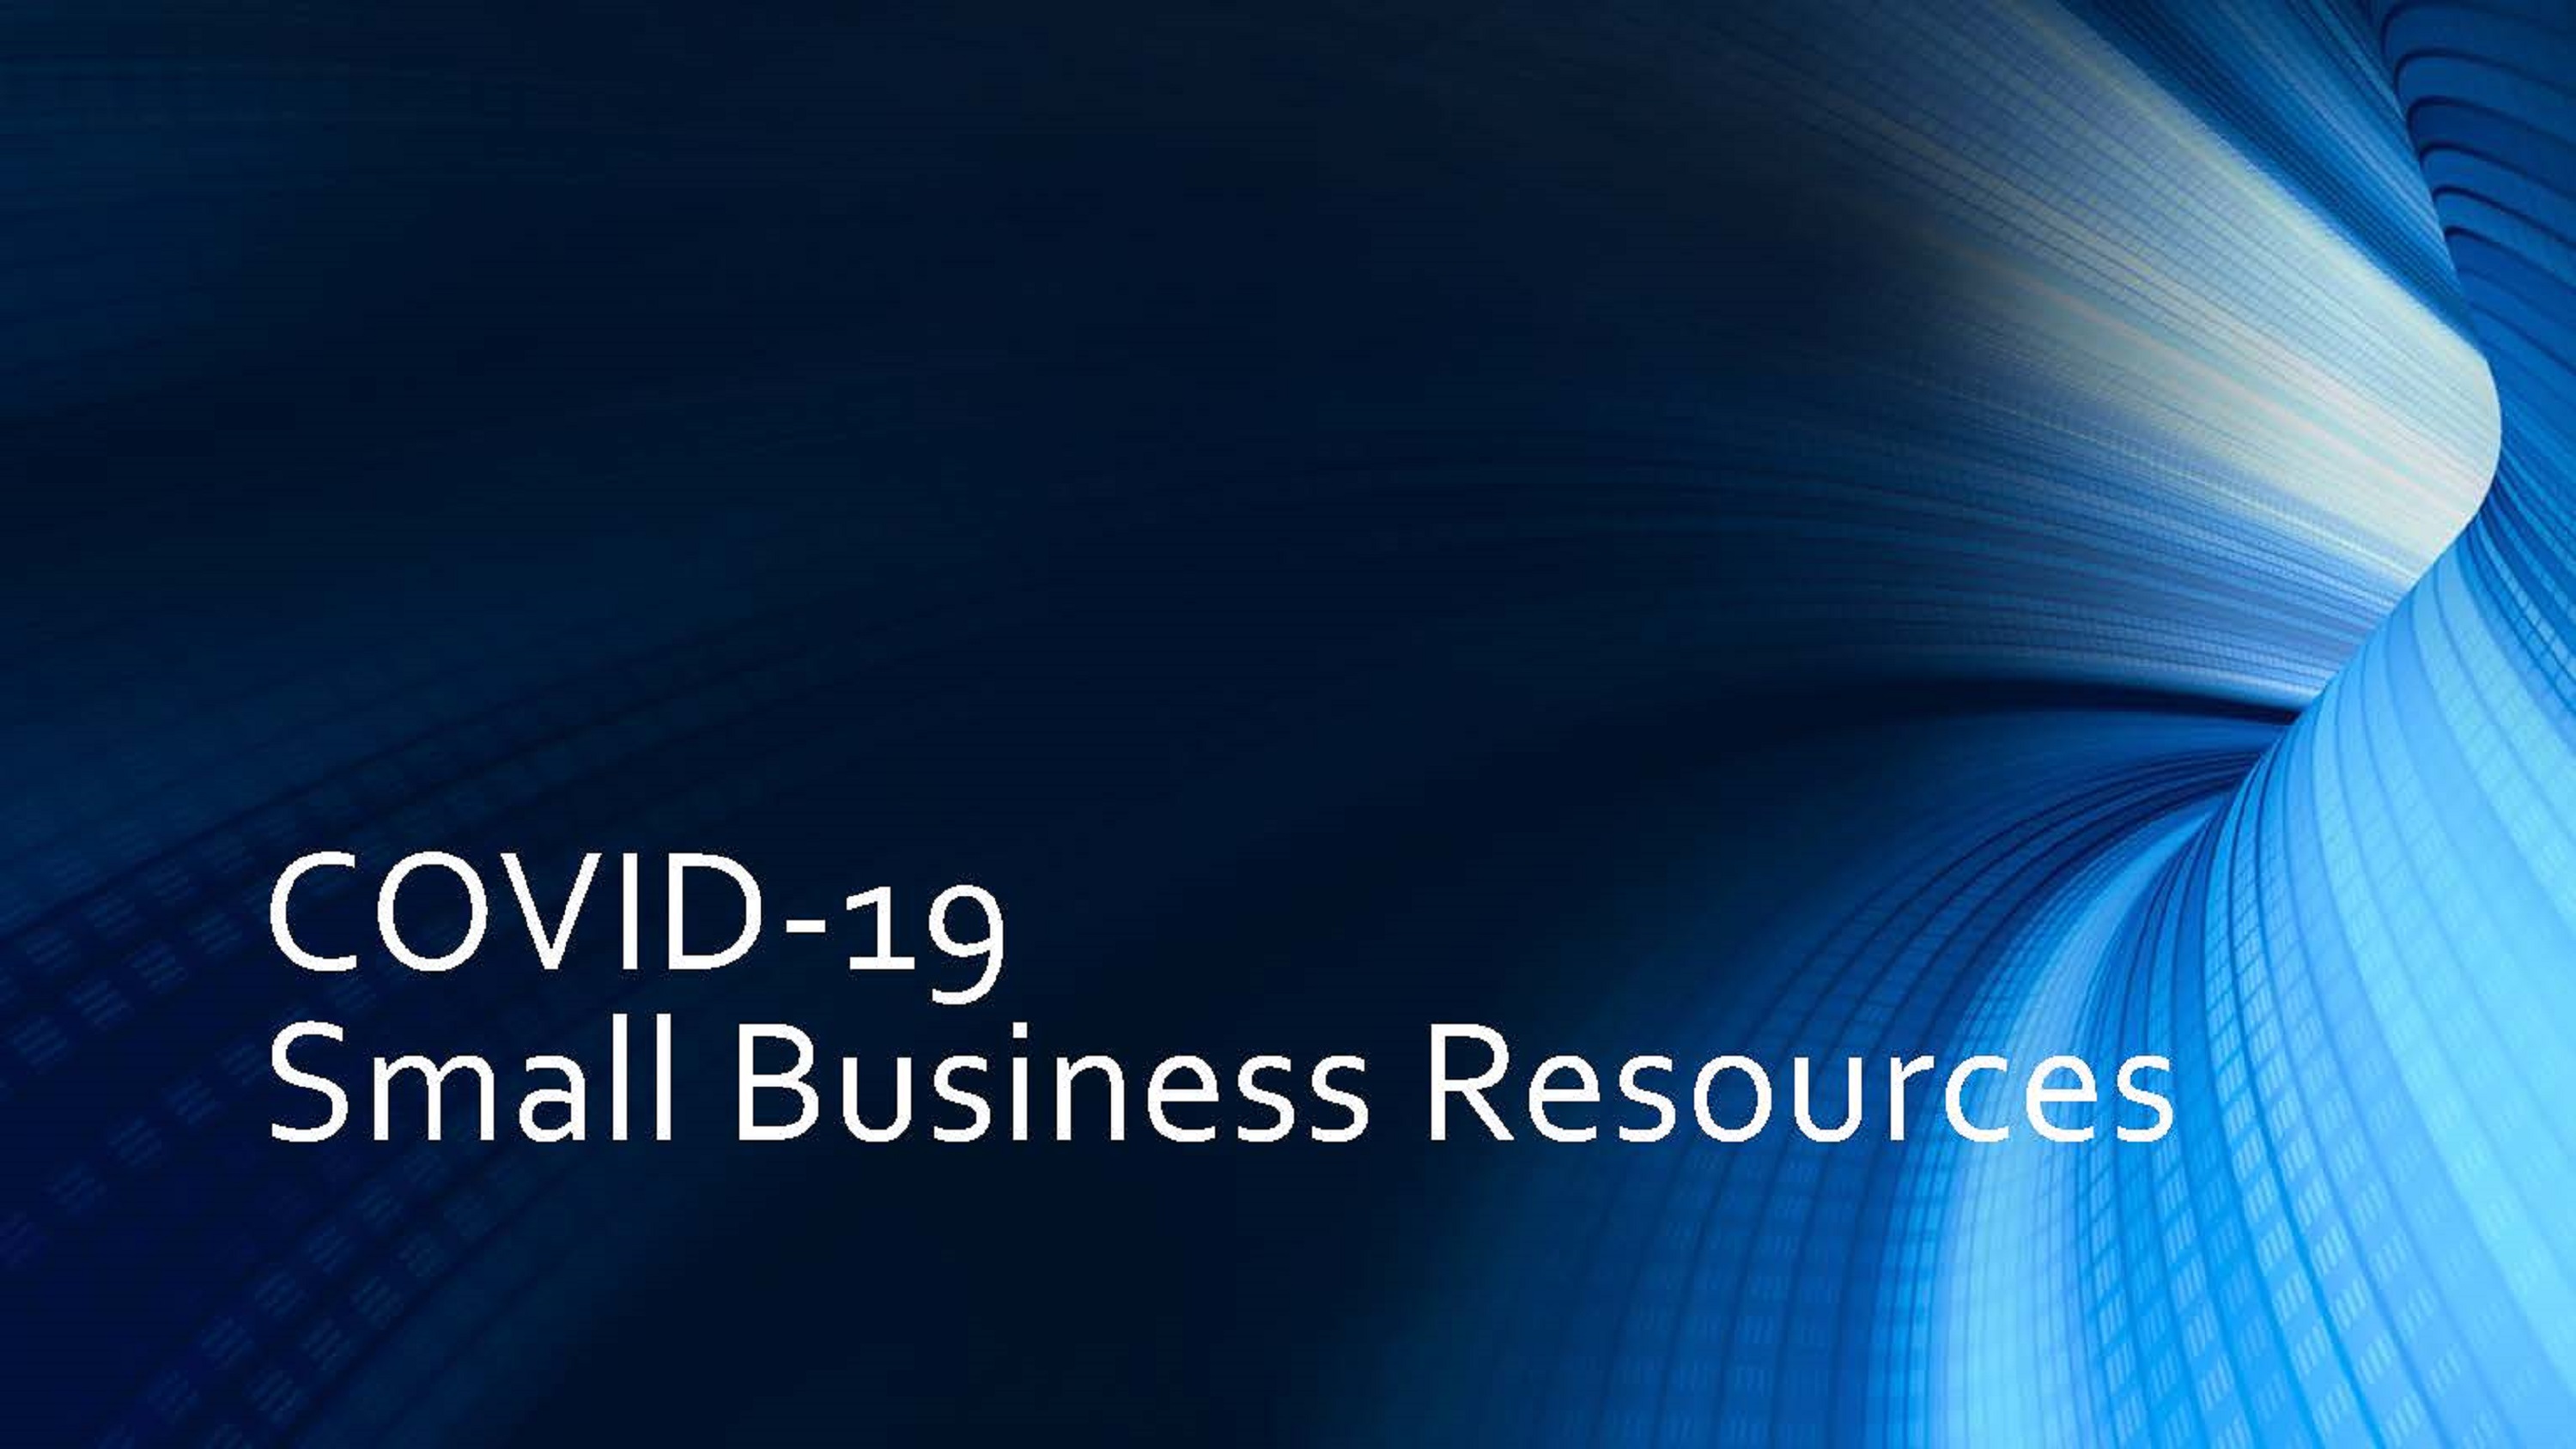 Covid-19 Small Business Resources Banner